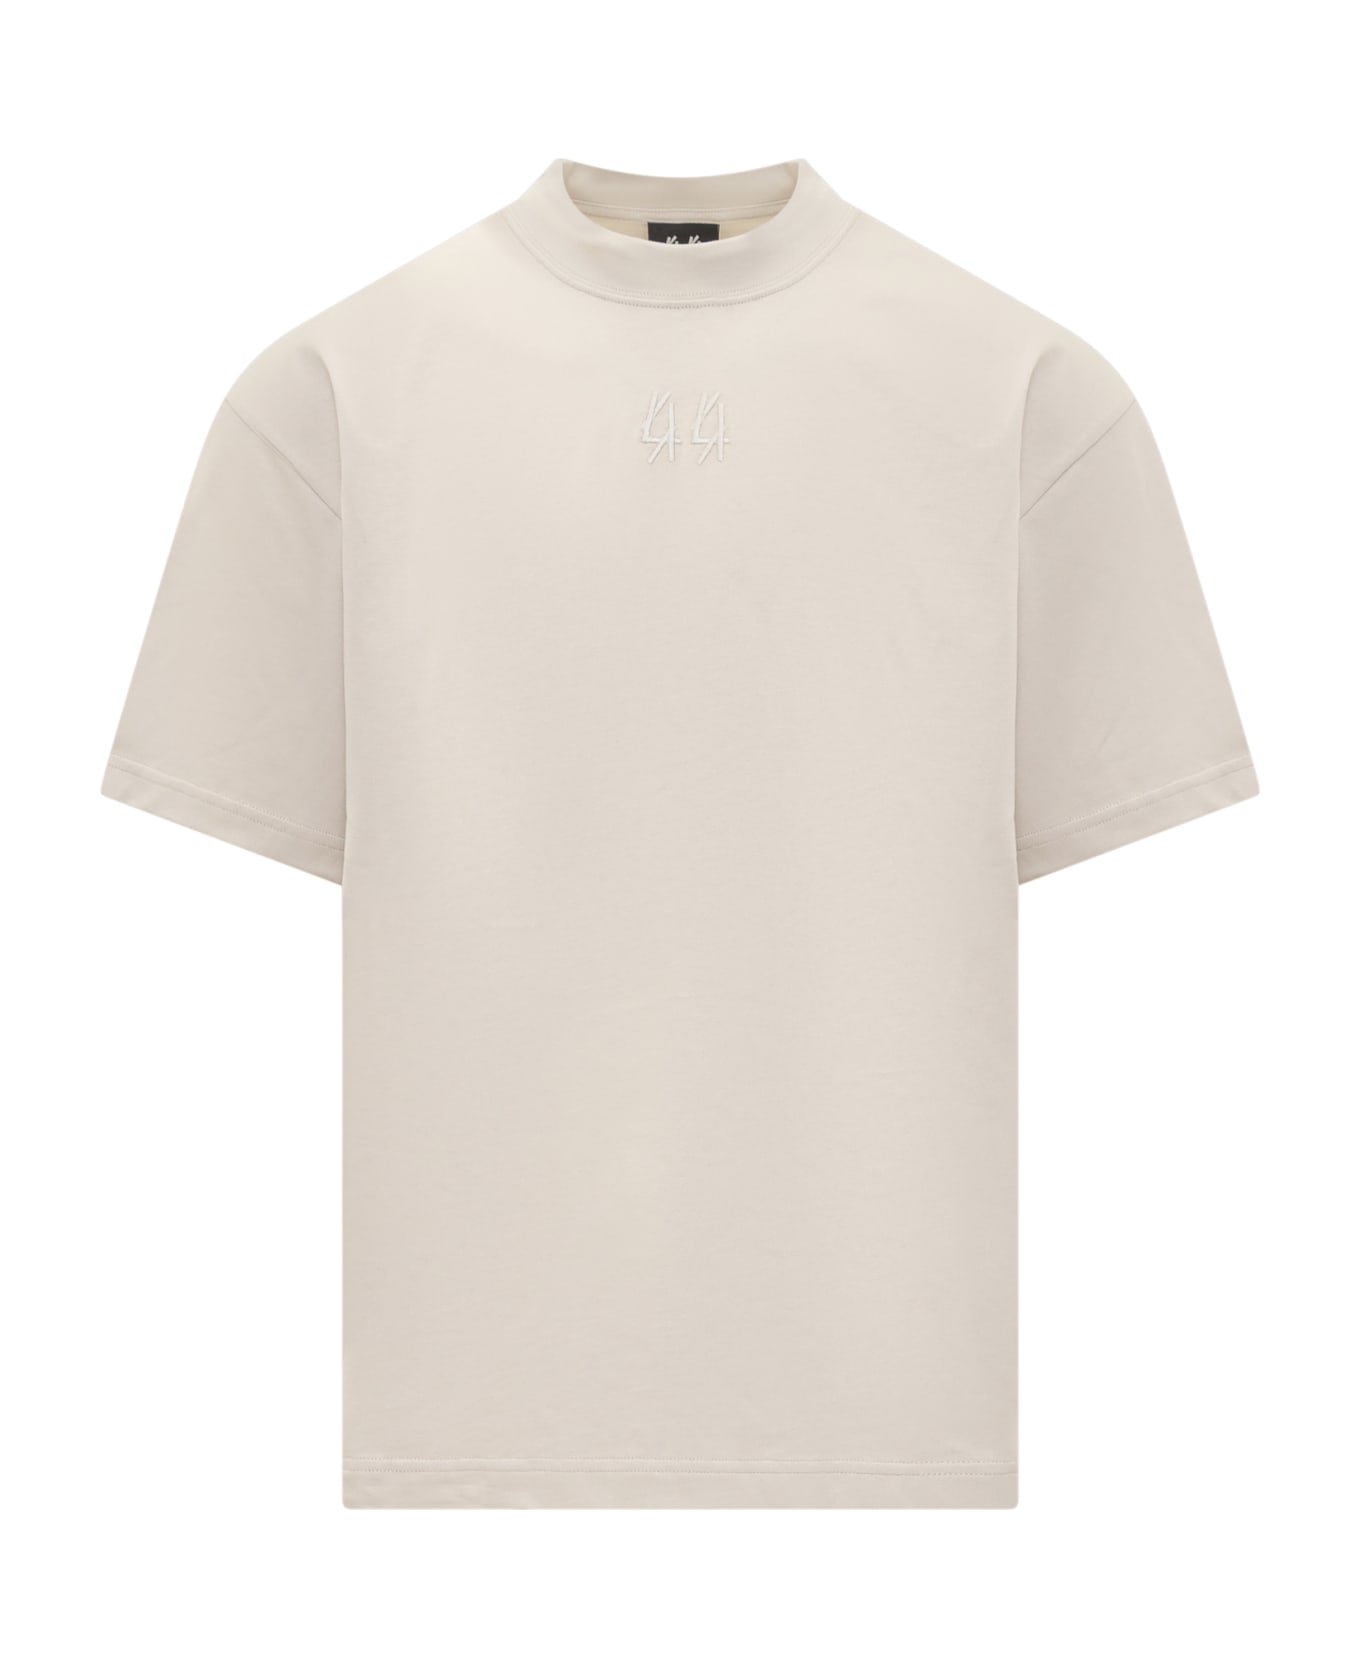 44 Label Group T-shirt With Logo - Bianco シャツ